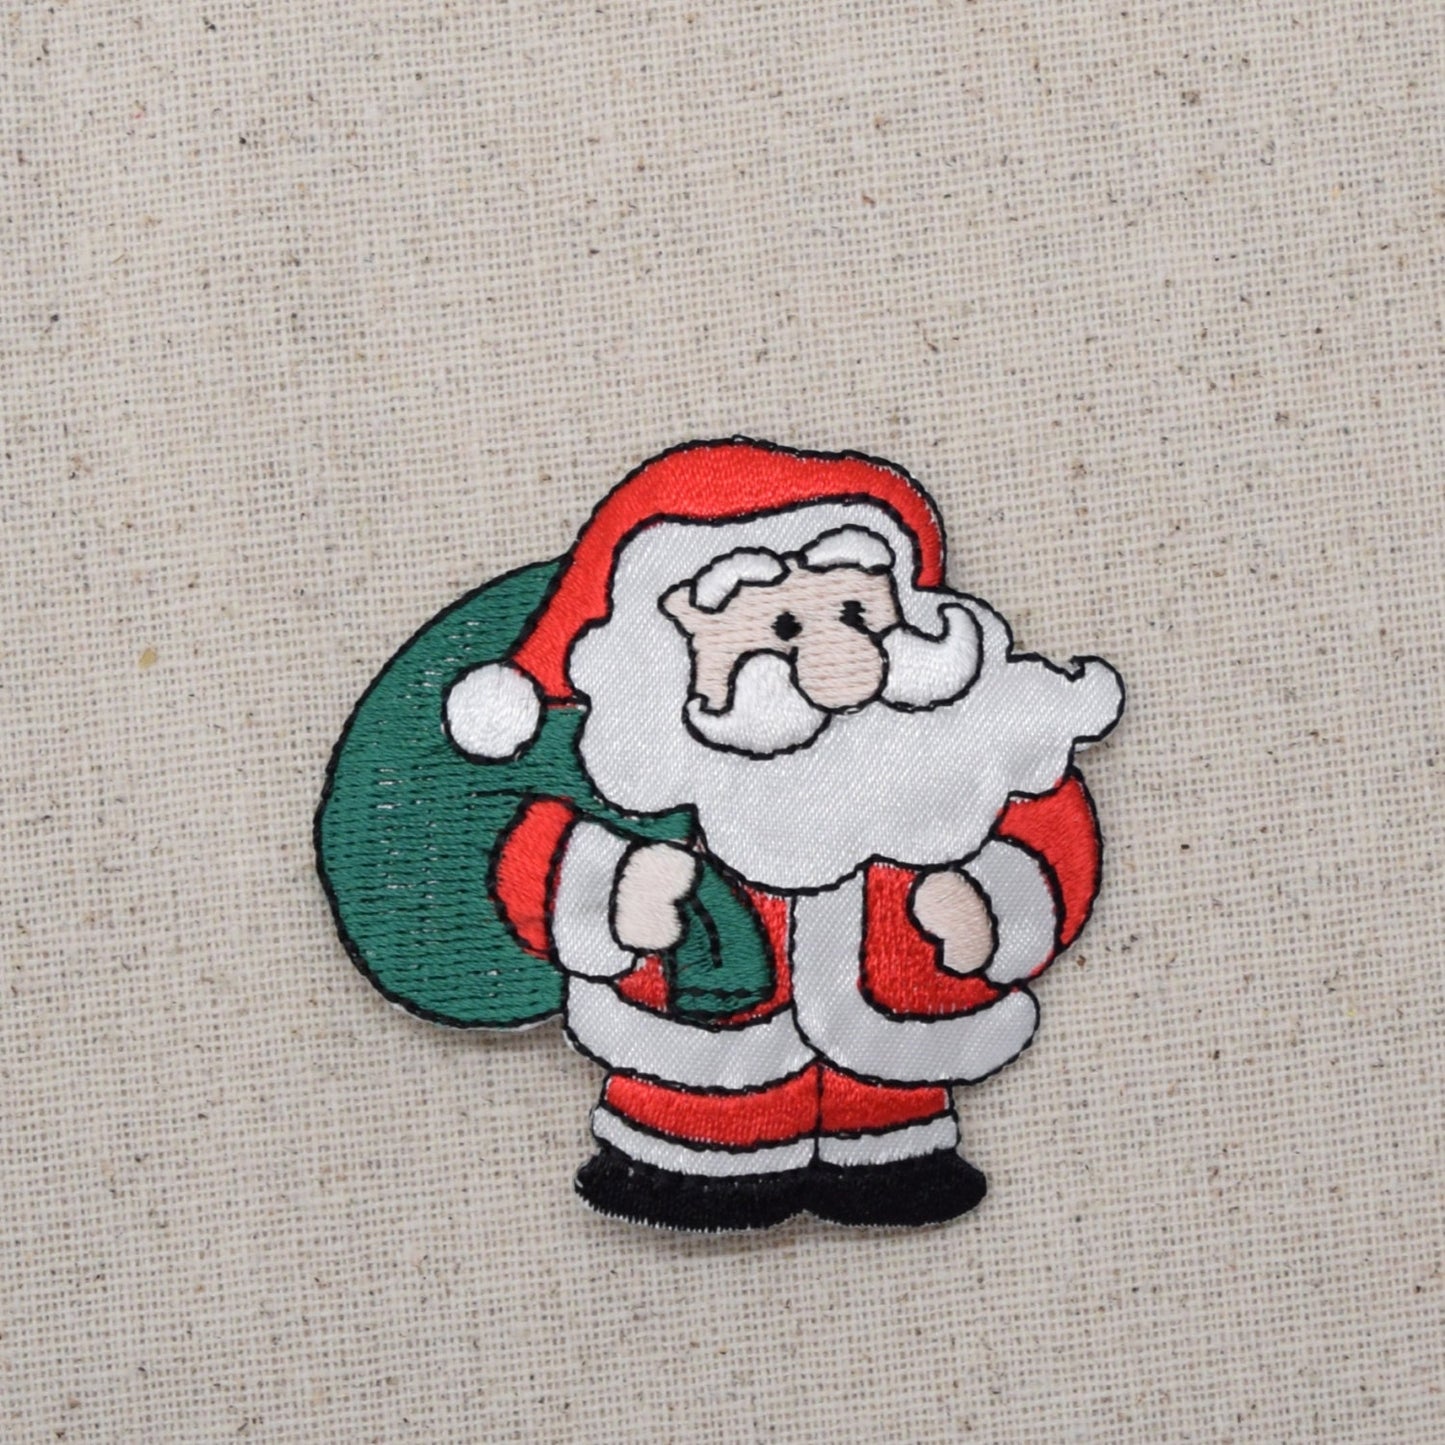 Christmas Santa Claus with Green Gift Bag, Presents, Embroidered Iron on Patch